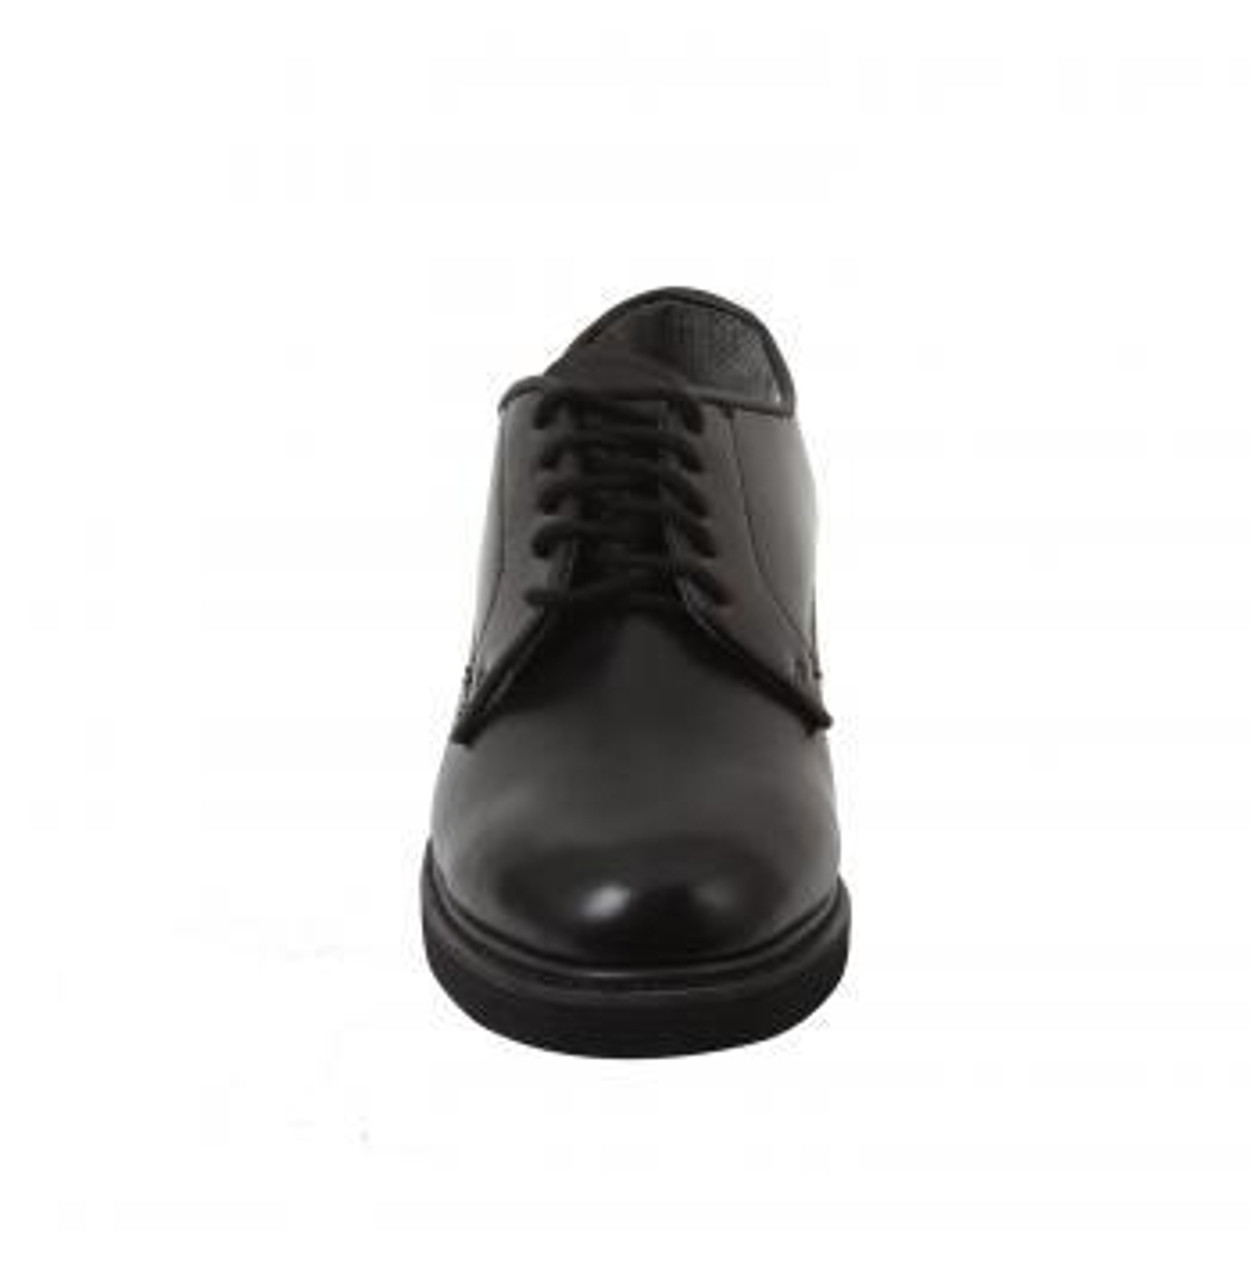 Military Uniform Oxford Leather Shoes from Hessen Tactical